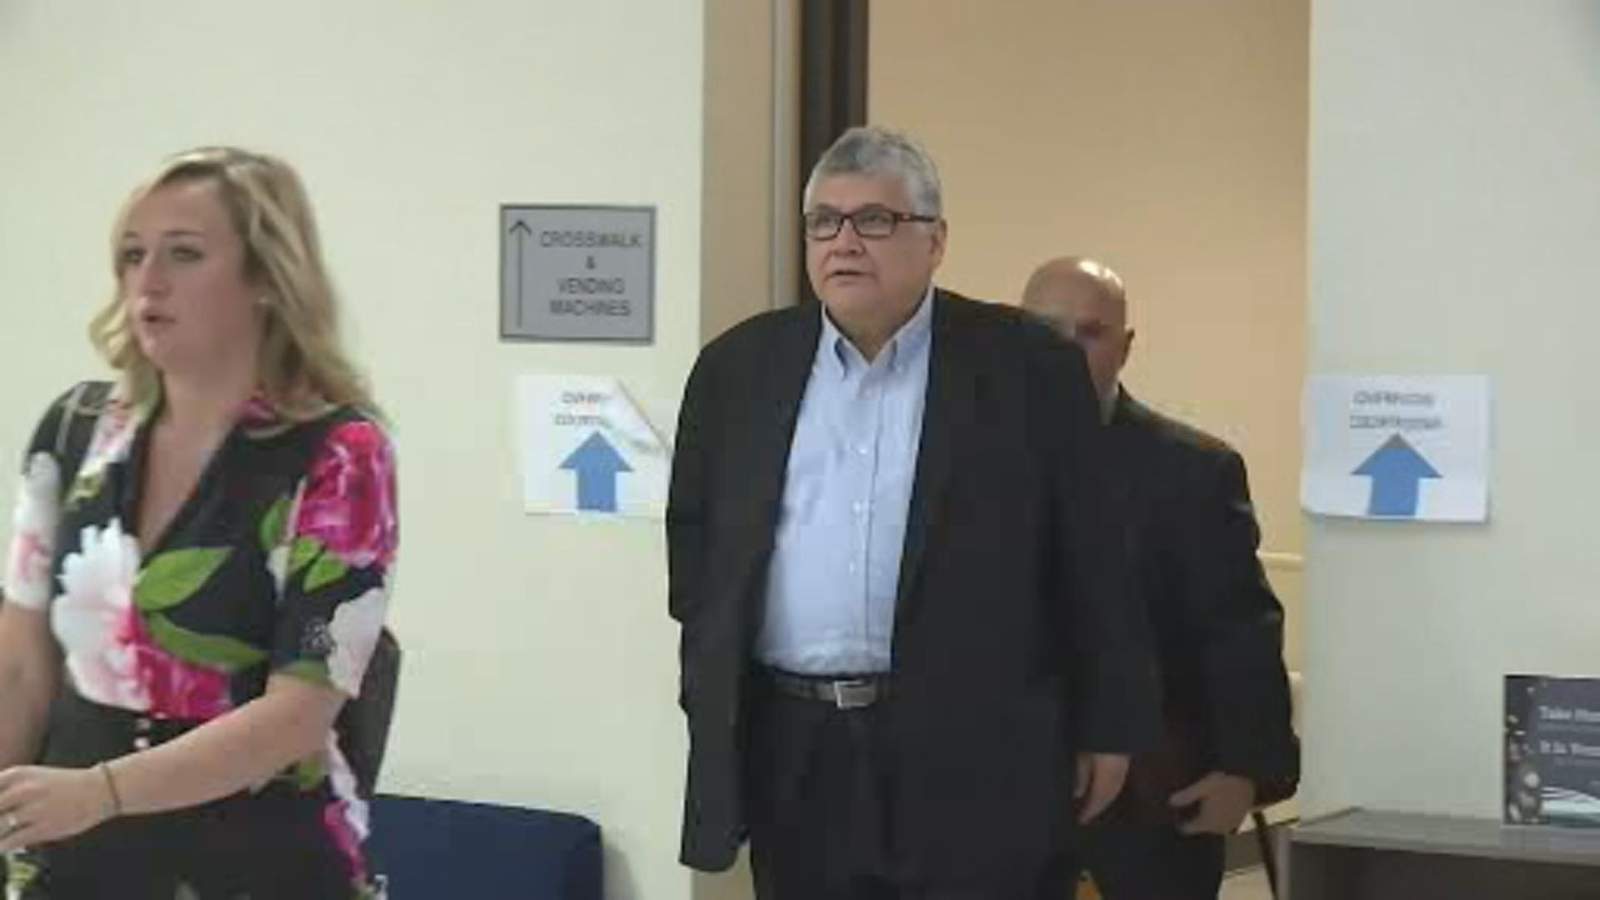 Manuel La Rose-Lopez, priest accused of sexually abusing children, headed to prison